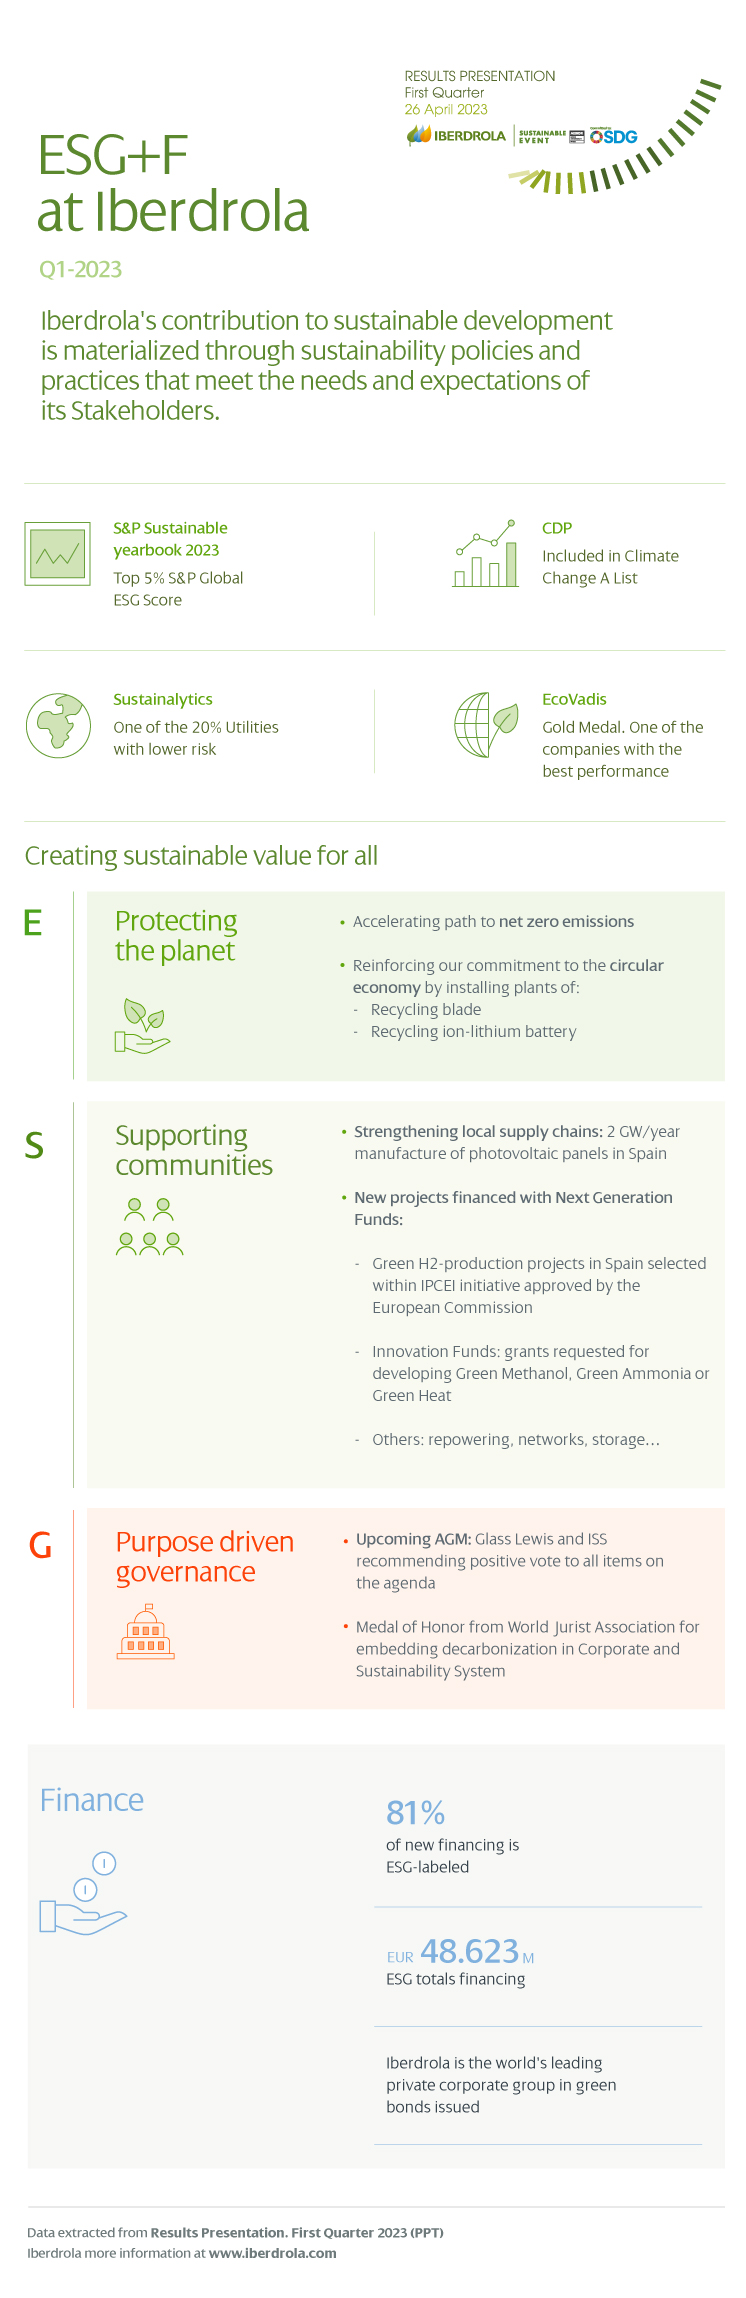 ESG+F at Iberdrola. Extracted from the First Quarter 2023 Results Presentation